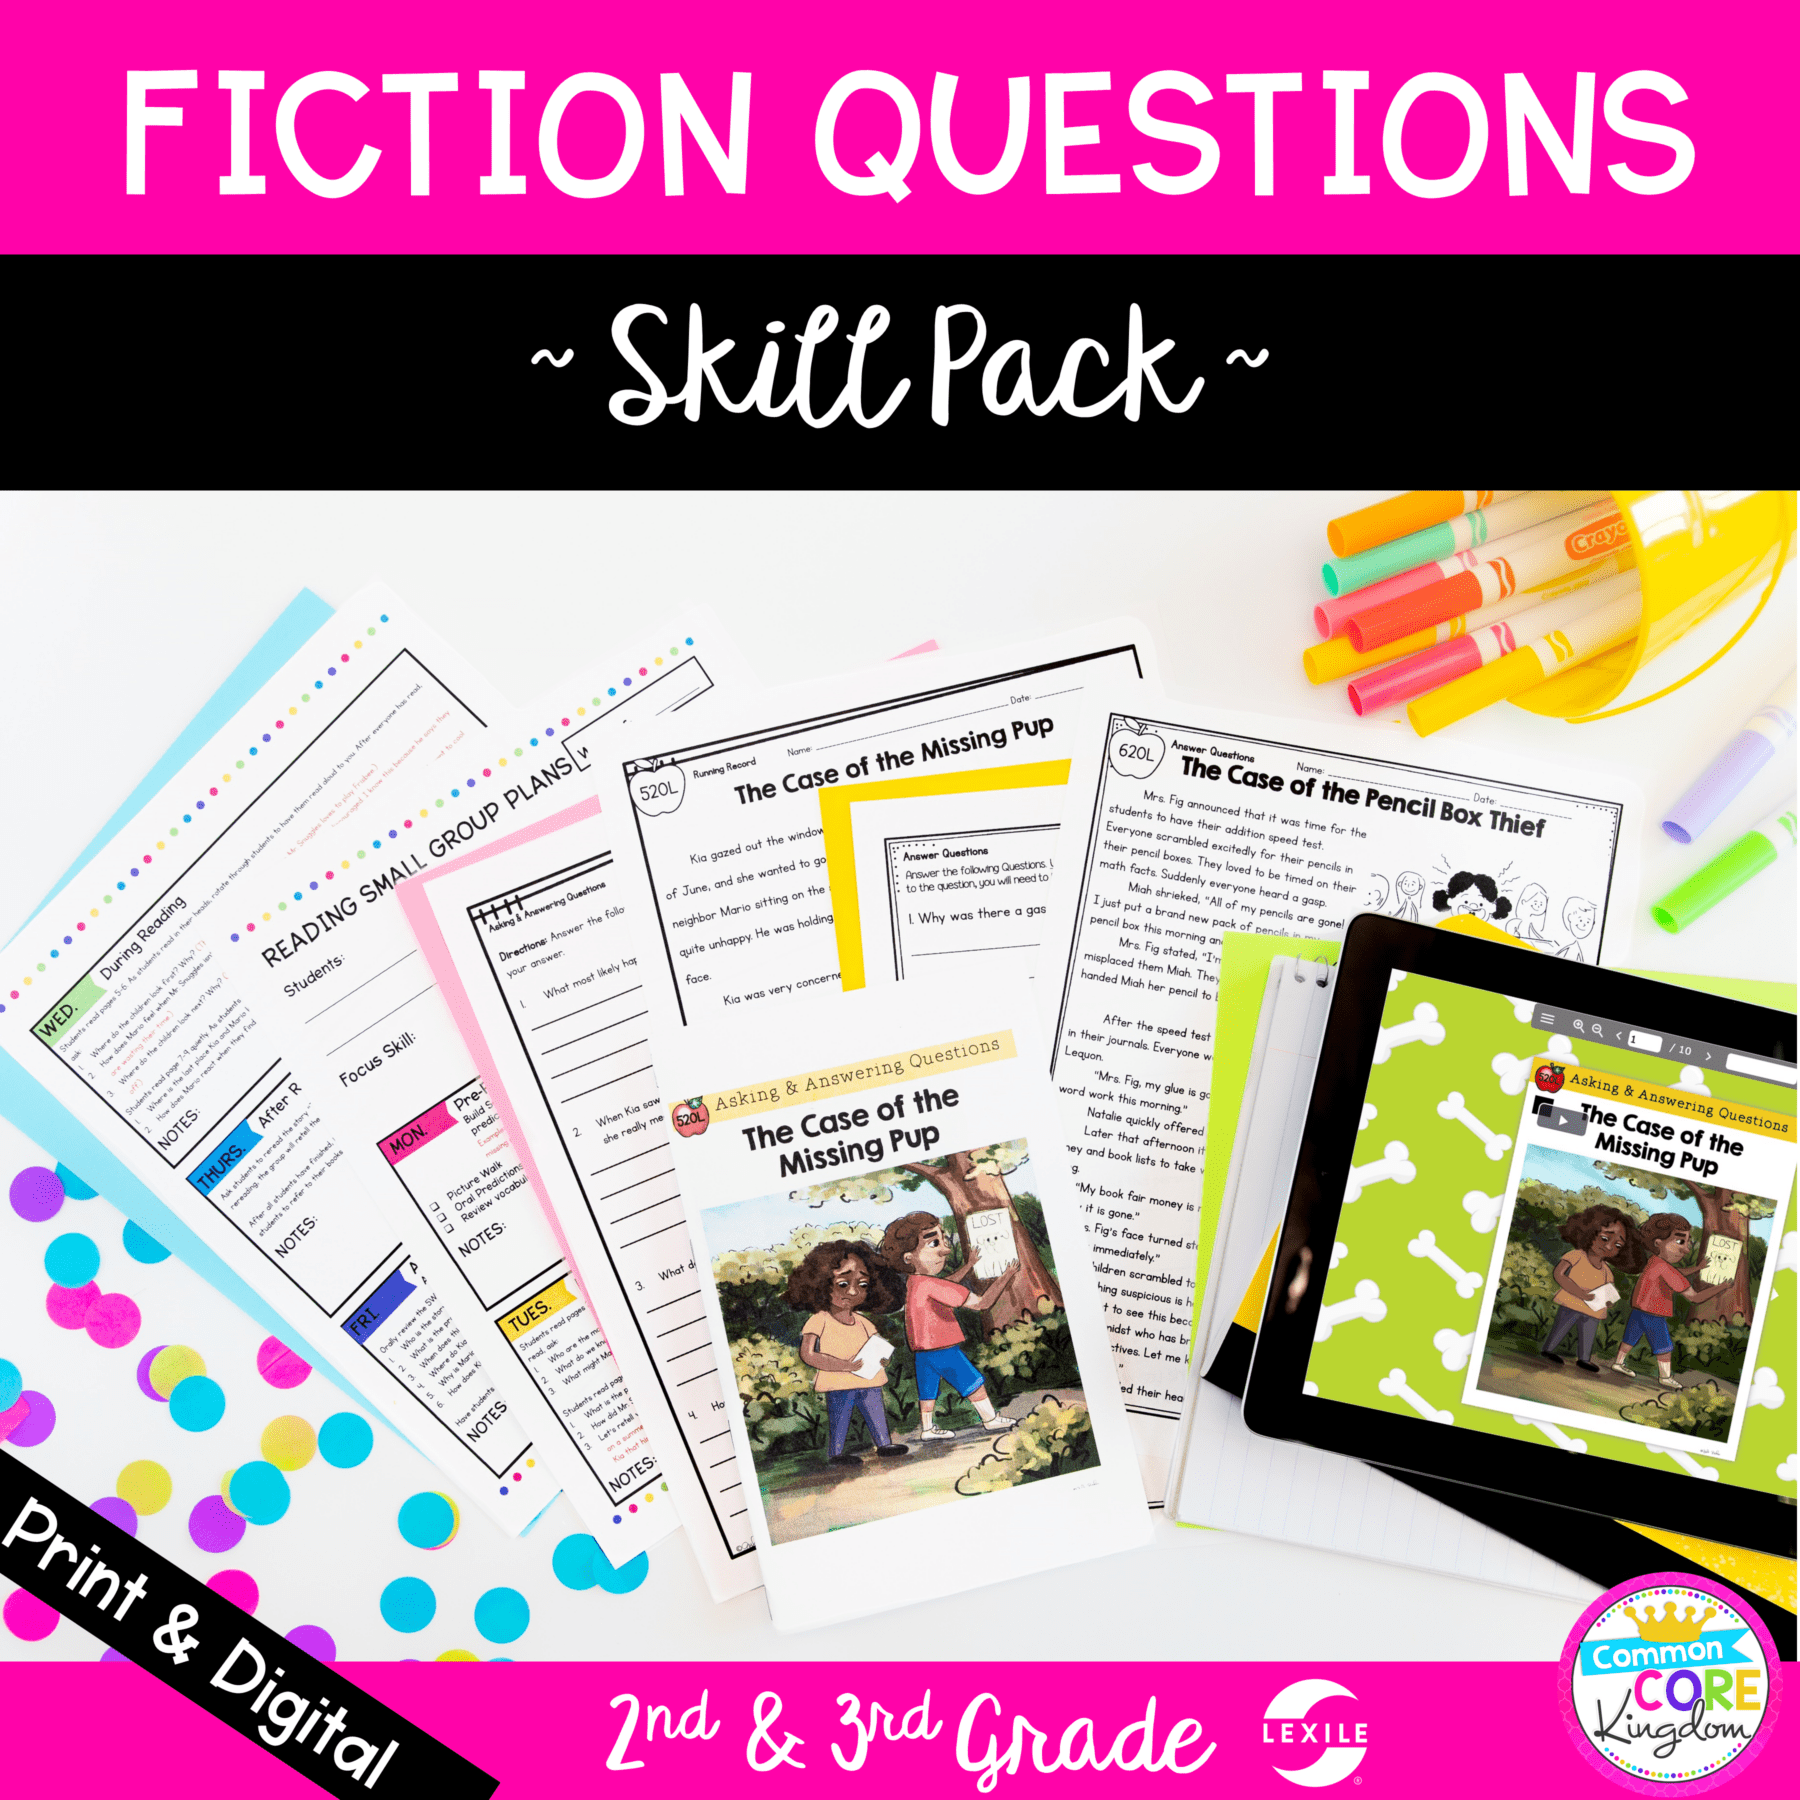 Fiction questions skill pack for 2nd and 3rd grade cover showing digital and printable reading comprehension worksheets